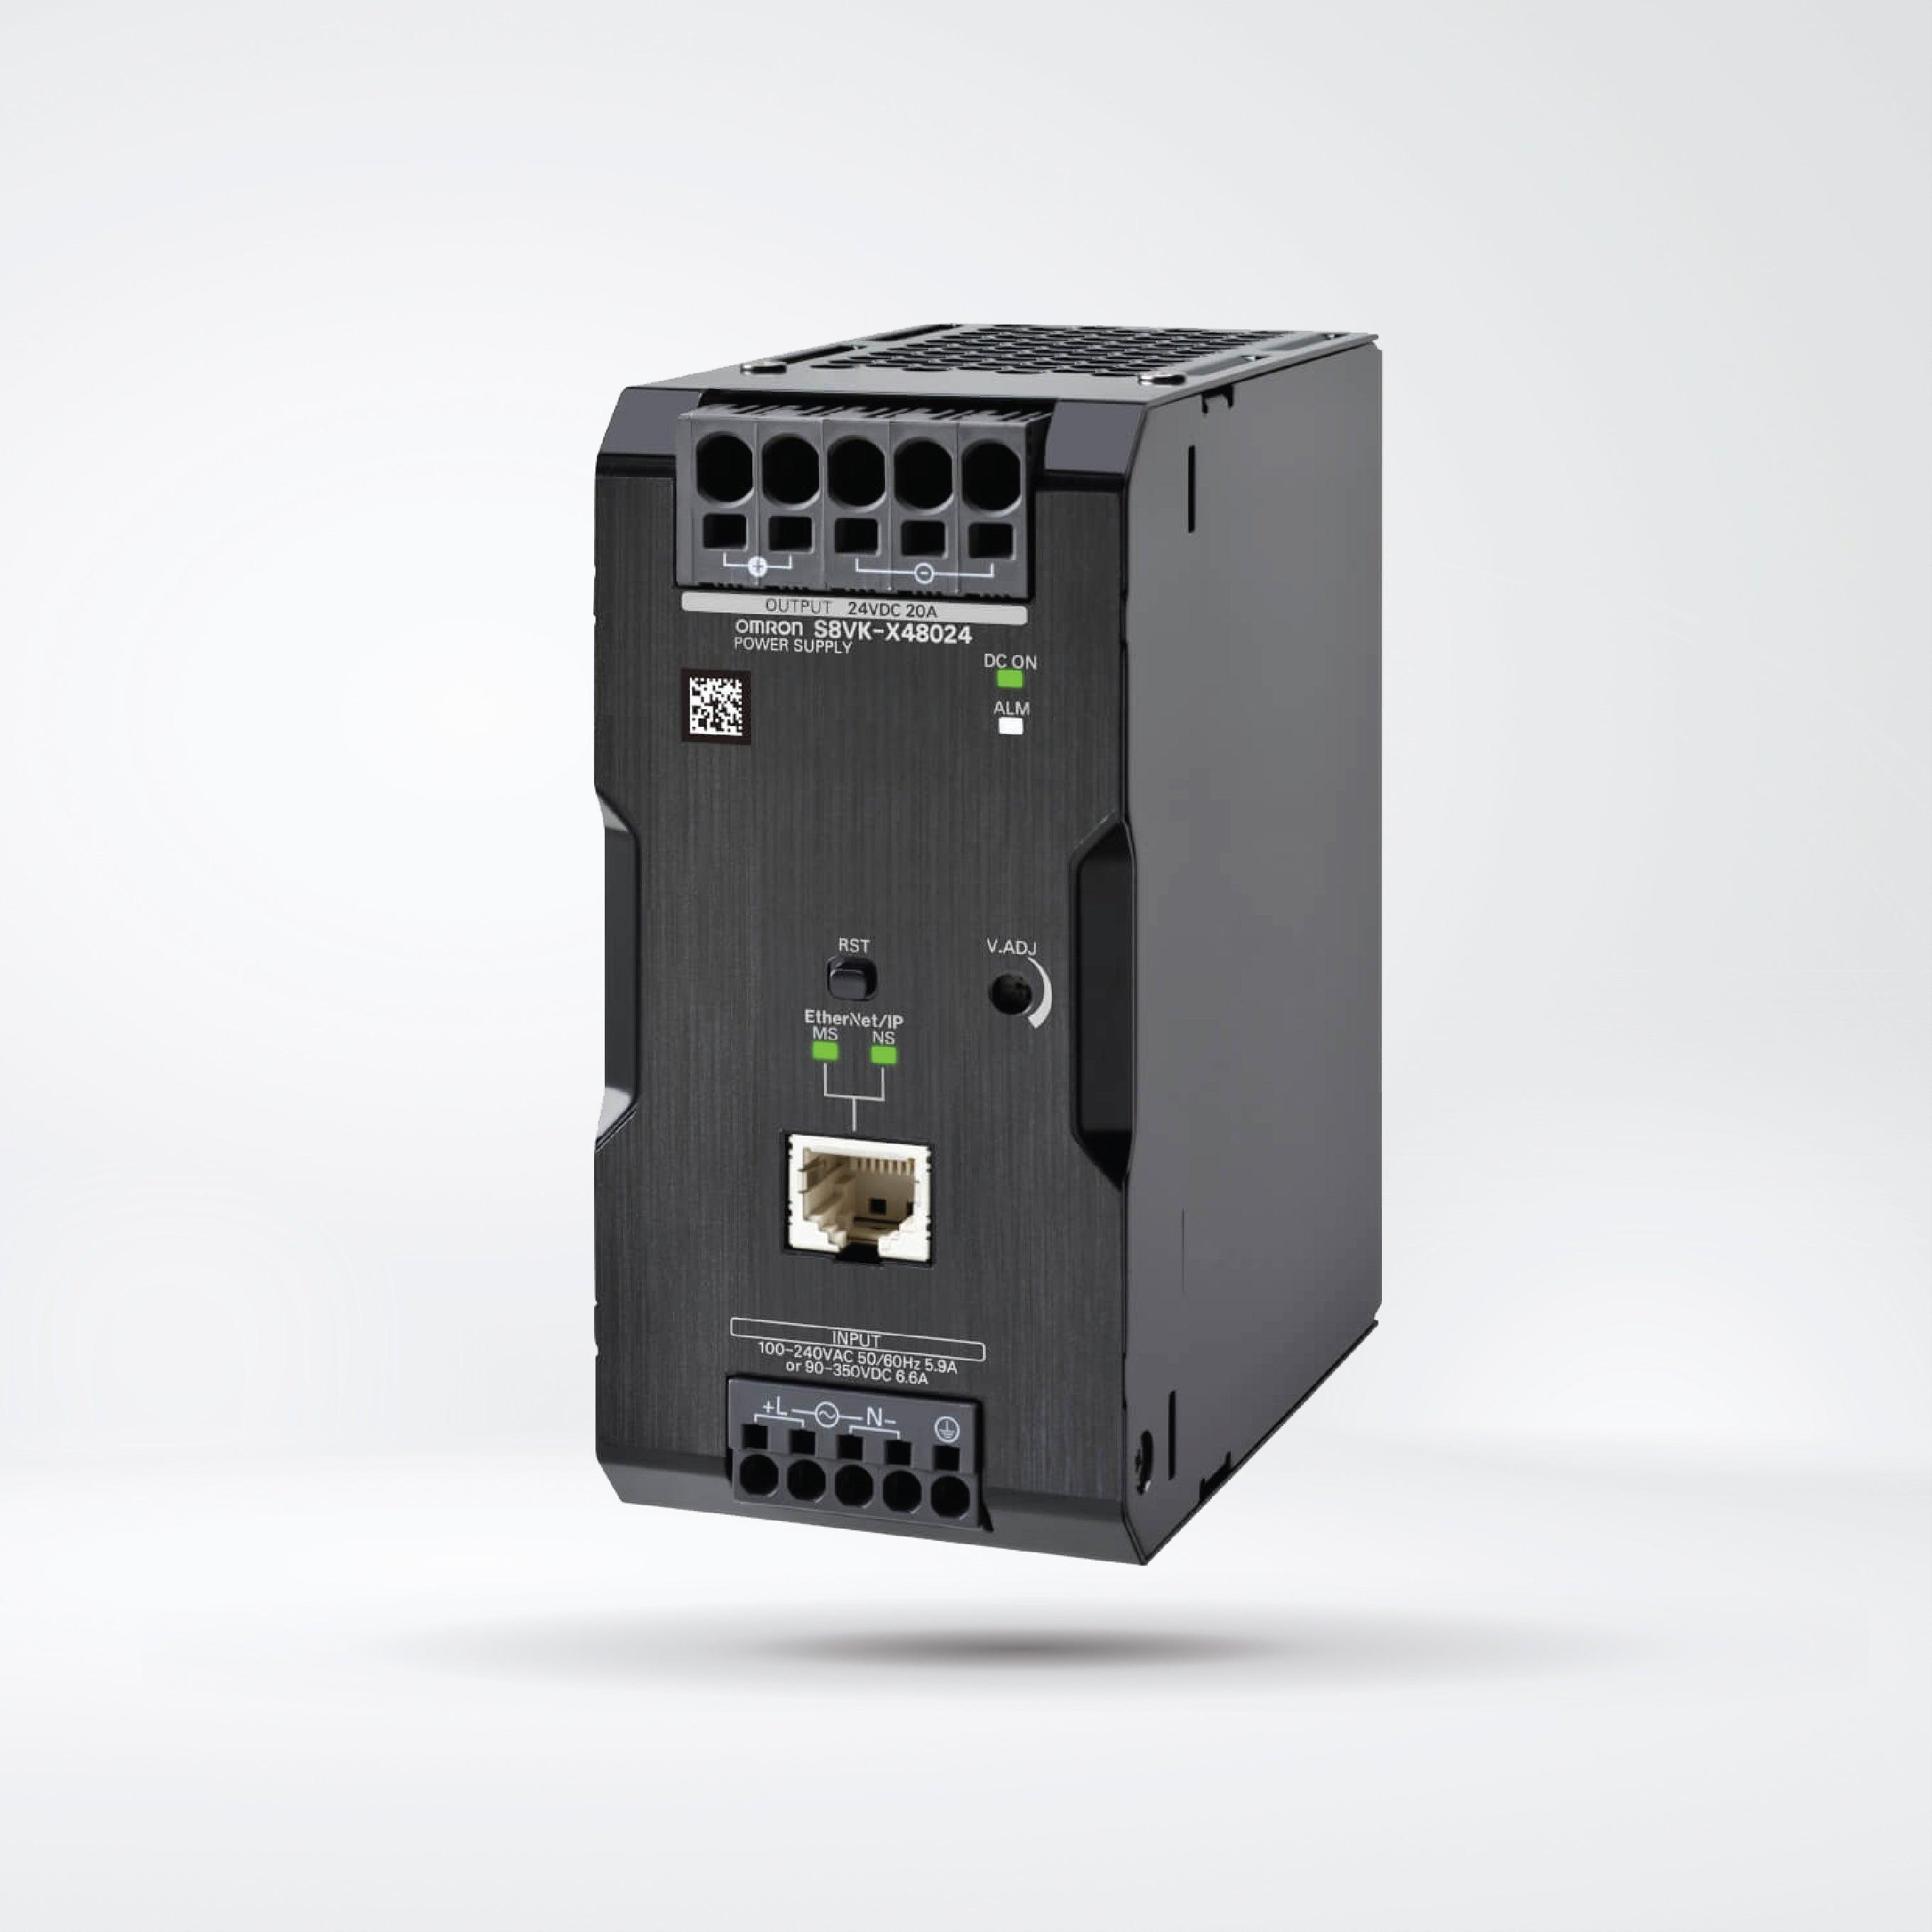 S8VK-X48024-EIP Switch Mode Power Supply, with EtherNet/IP, Modbus TCP,480 W, 24 VDC - Riverplus